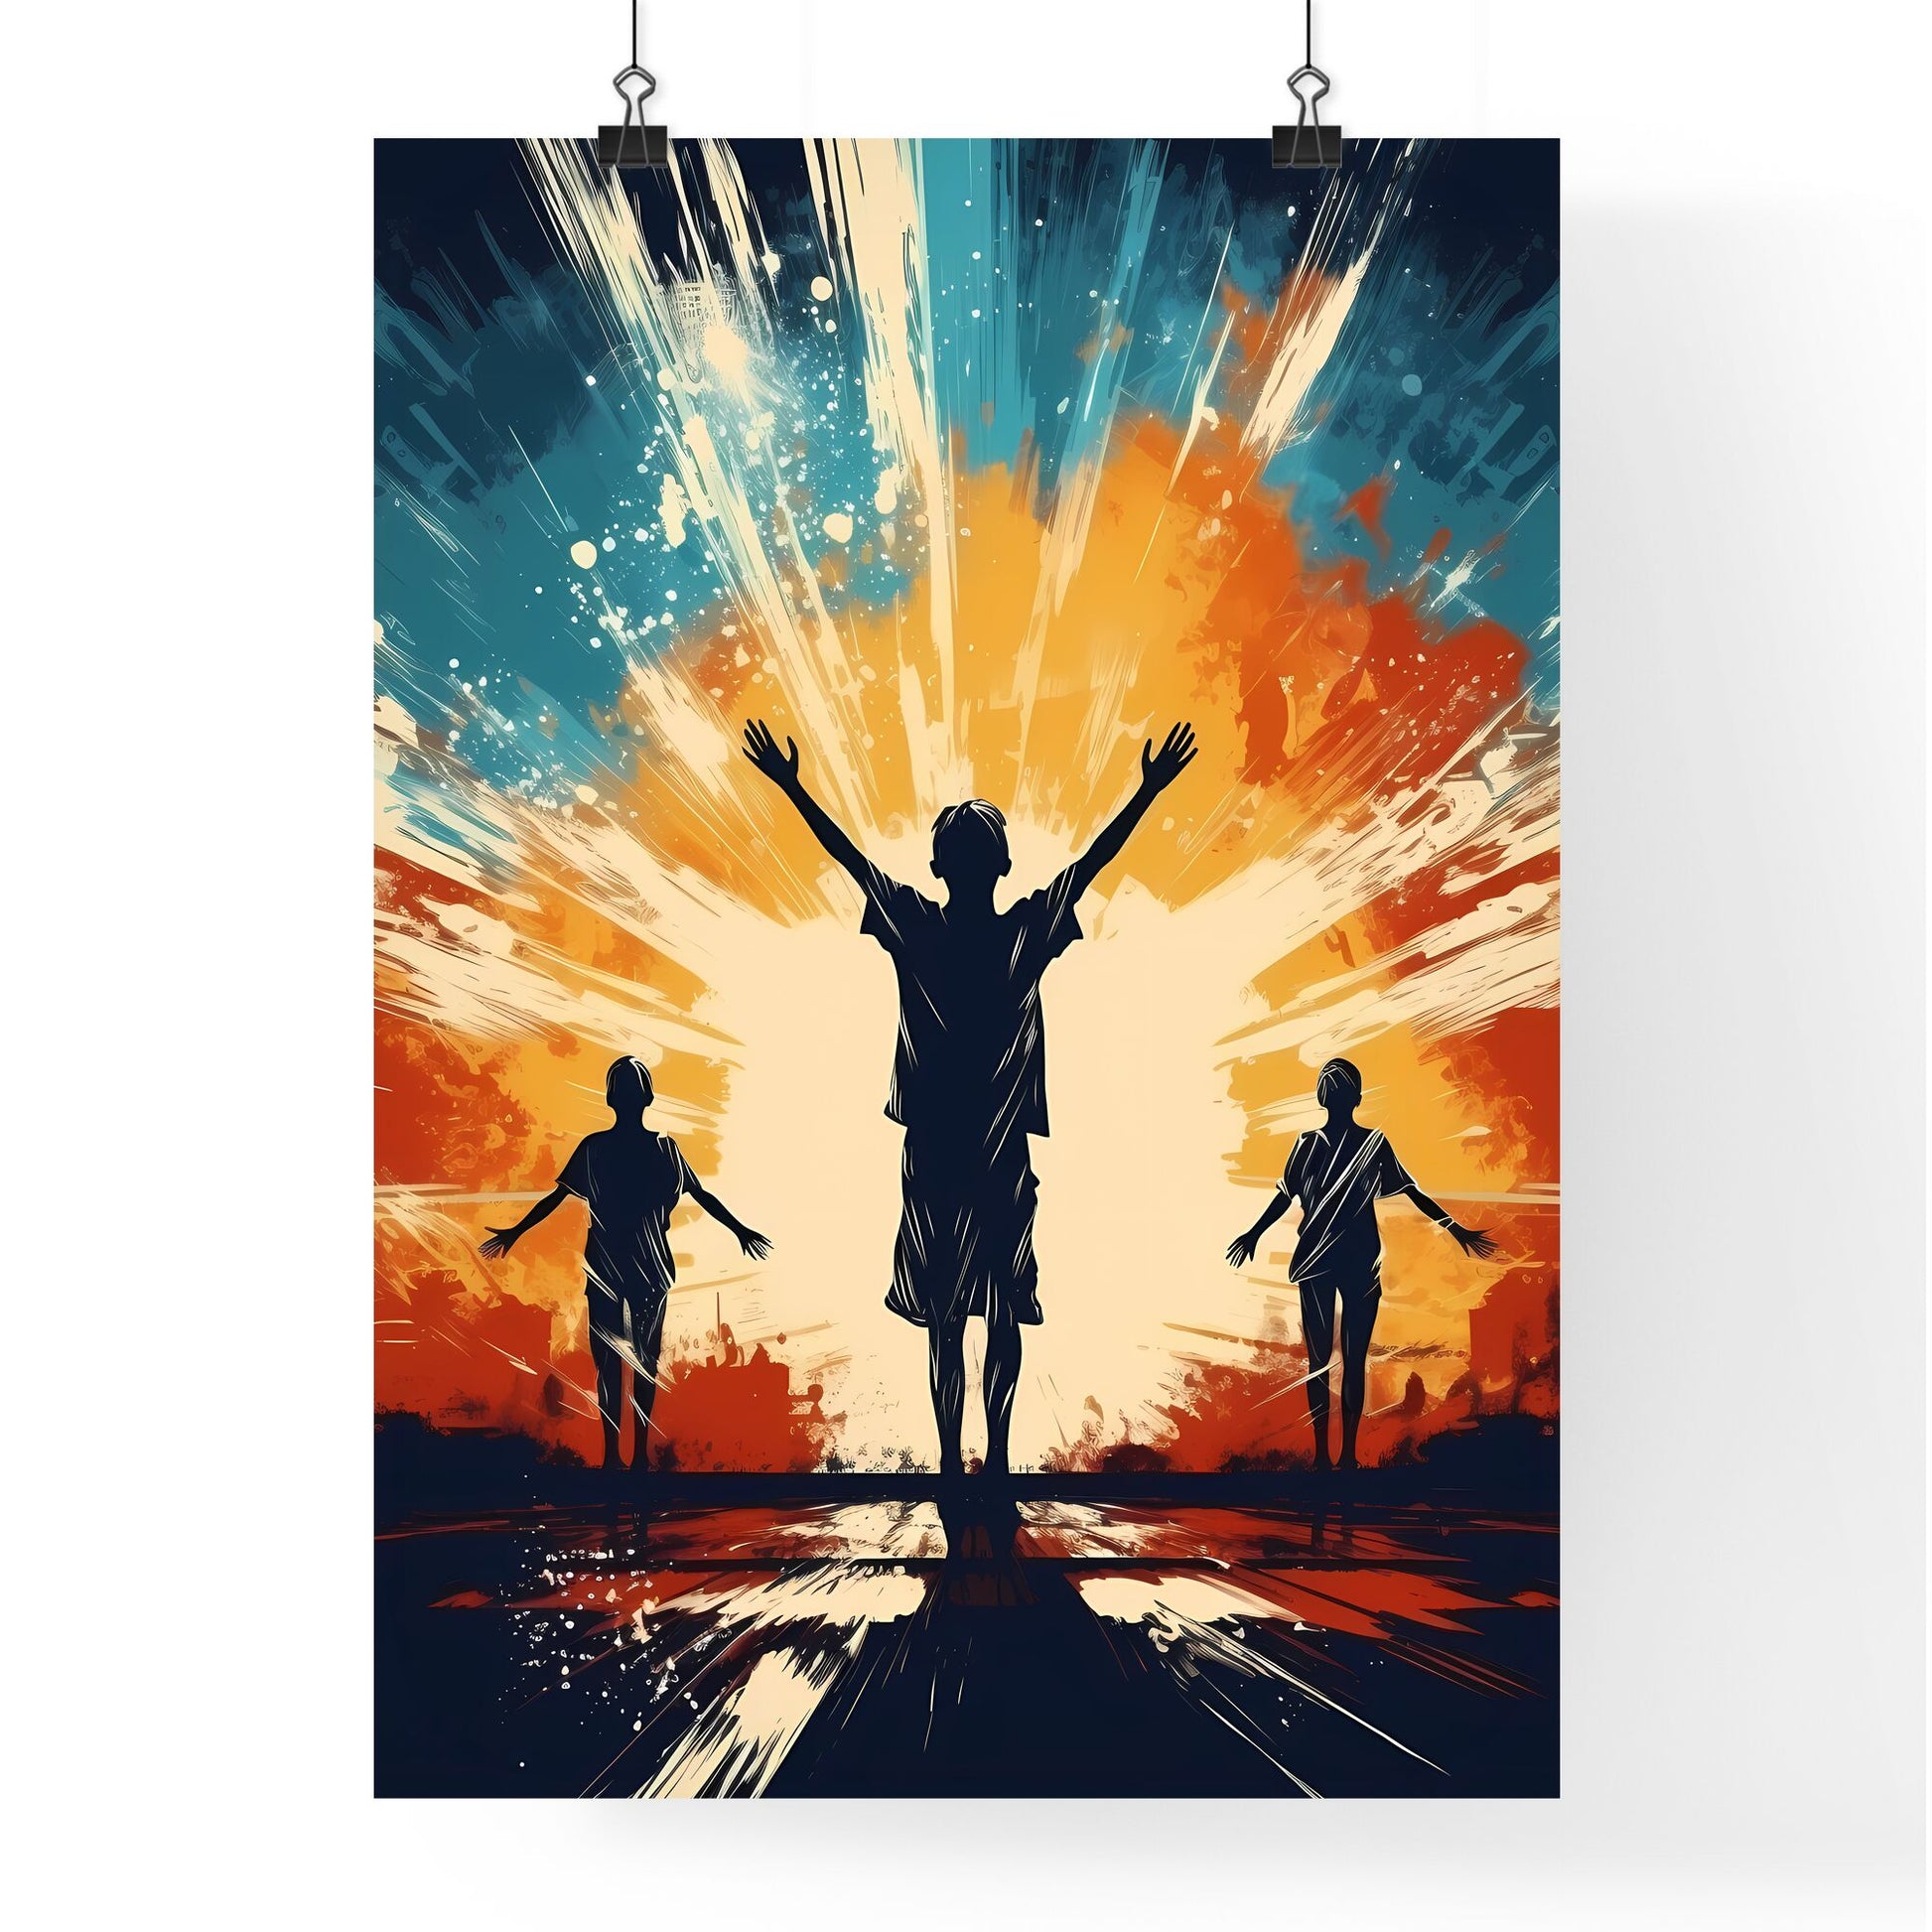 Group Of People With Their Arms Raised Art Print Default Title